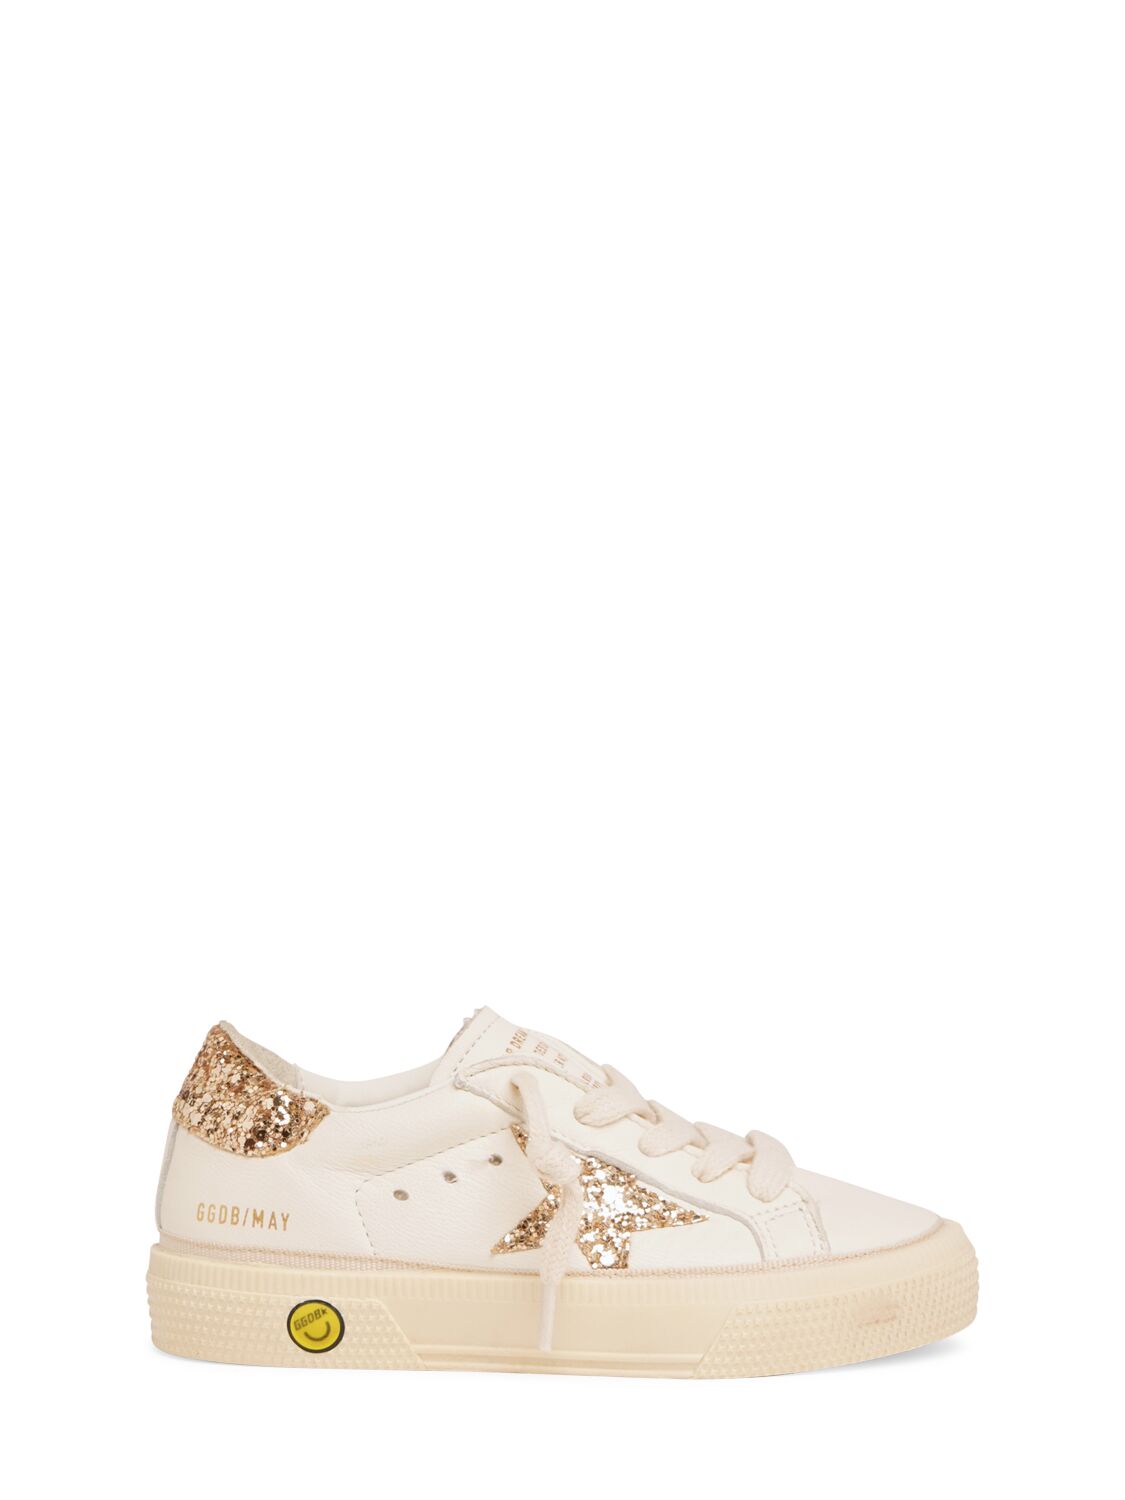 Golden Goose Kids' May Leather Glitter Lace-up Sneakers In White,gold